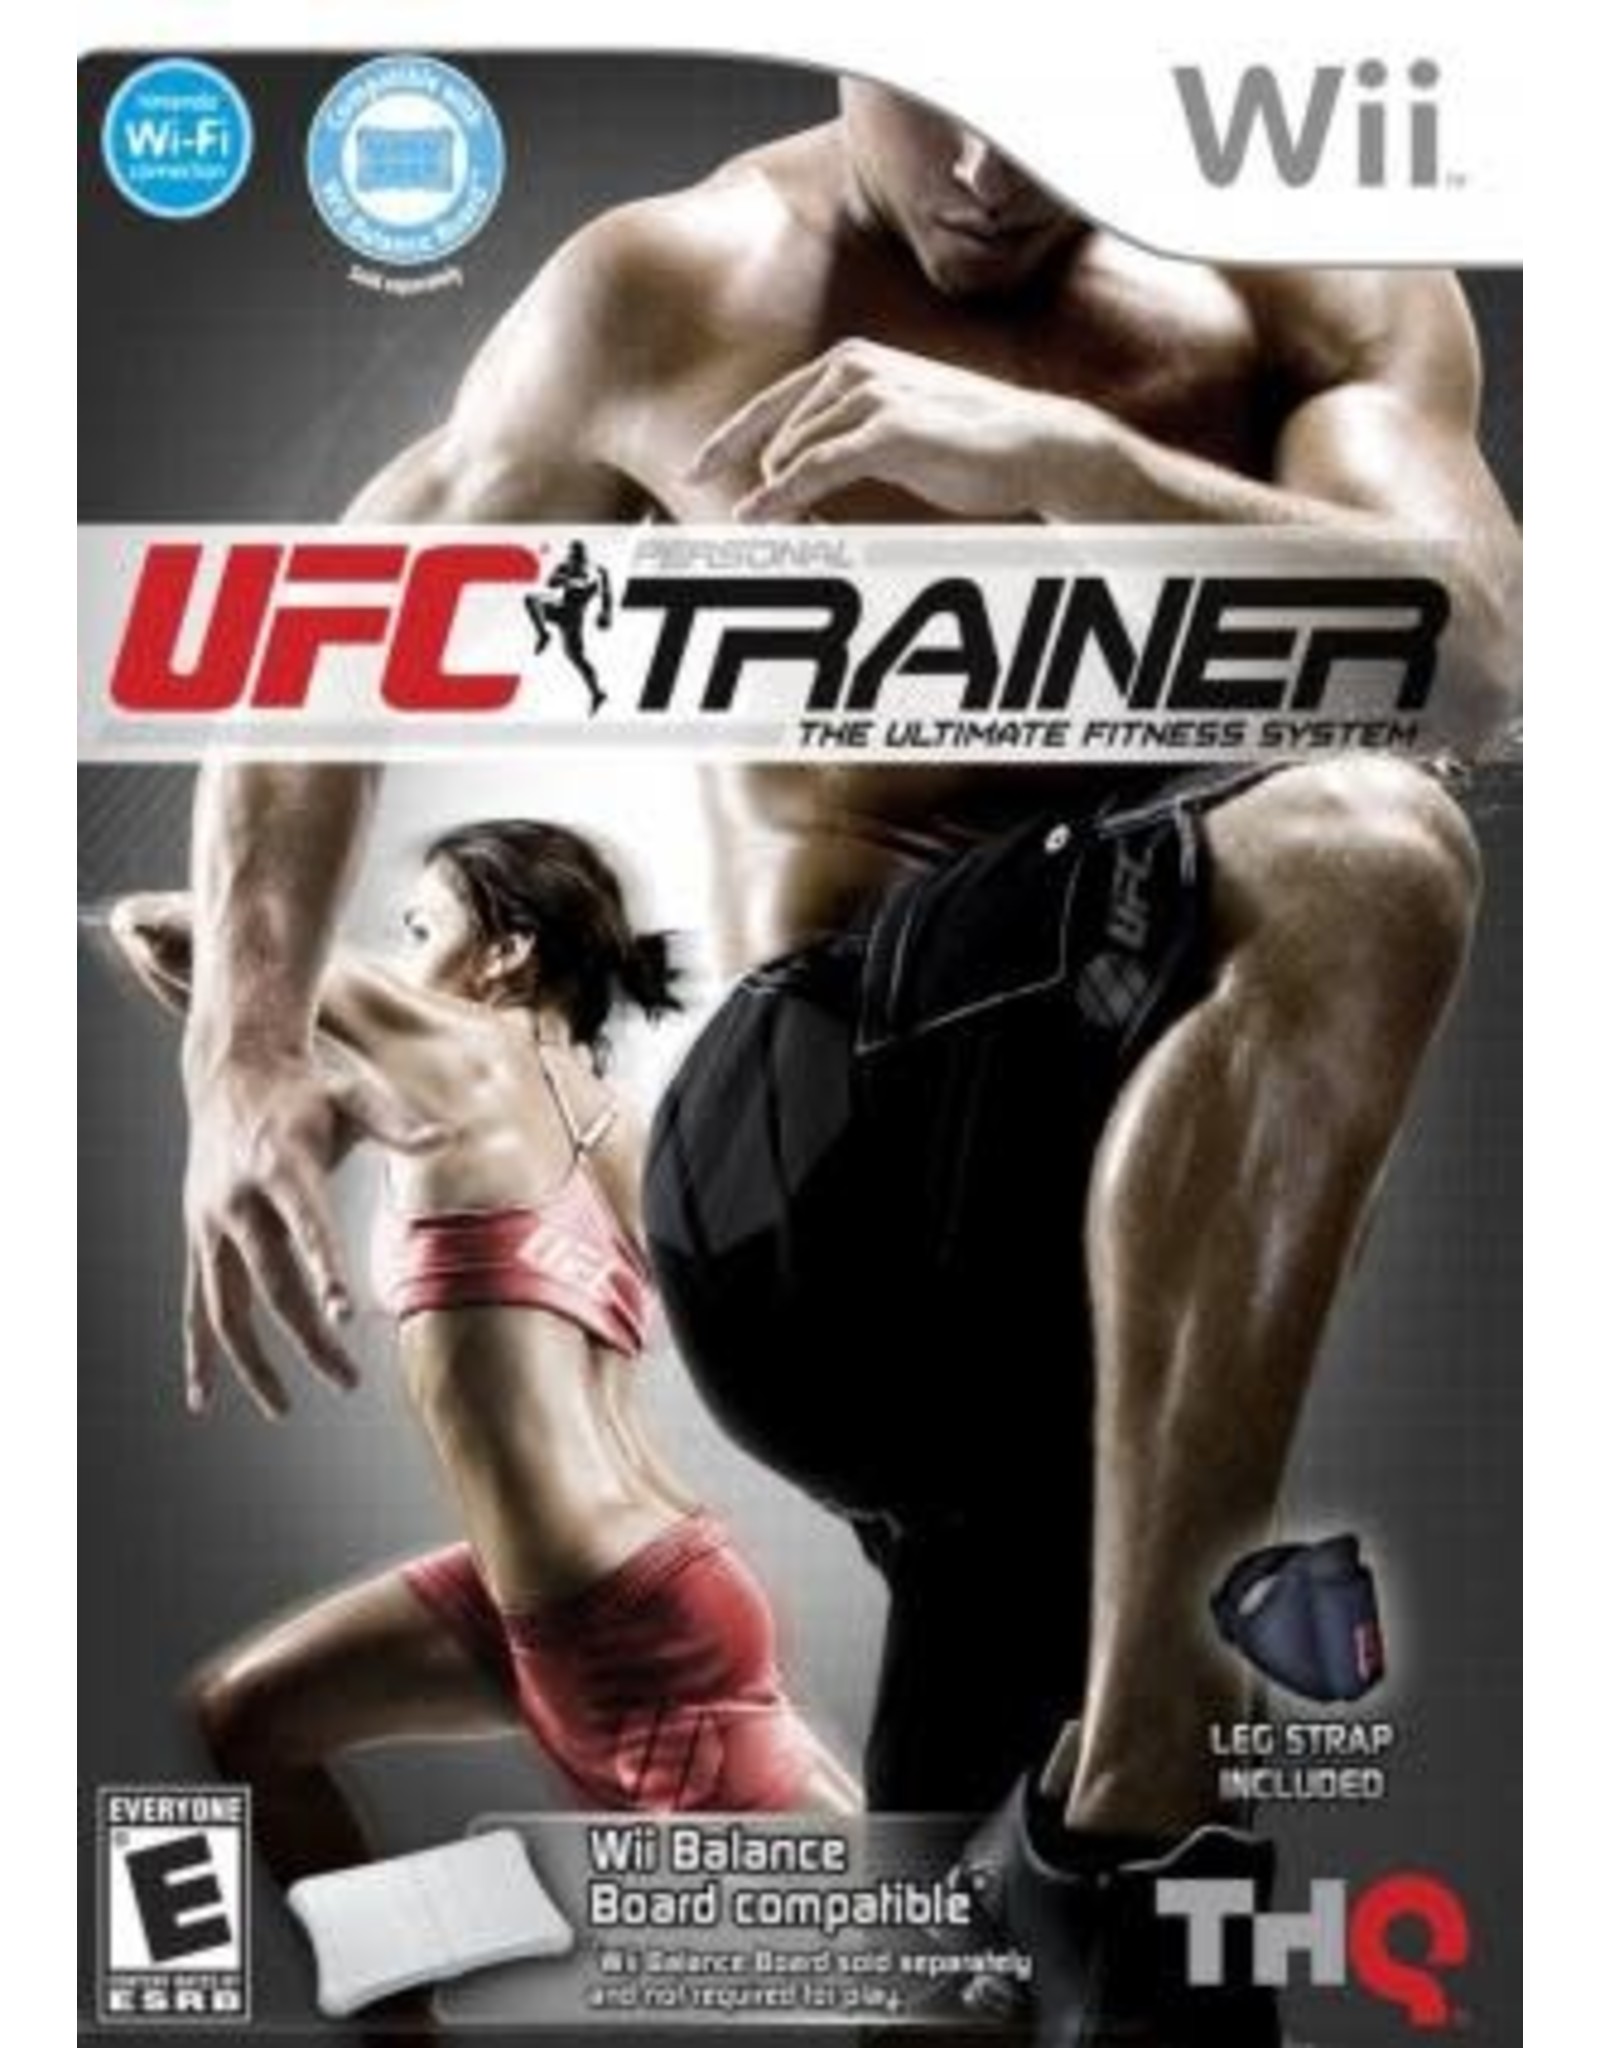 Wii UFC Personal Trainer: The Ultimate Fitness System (CIB)